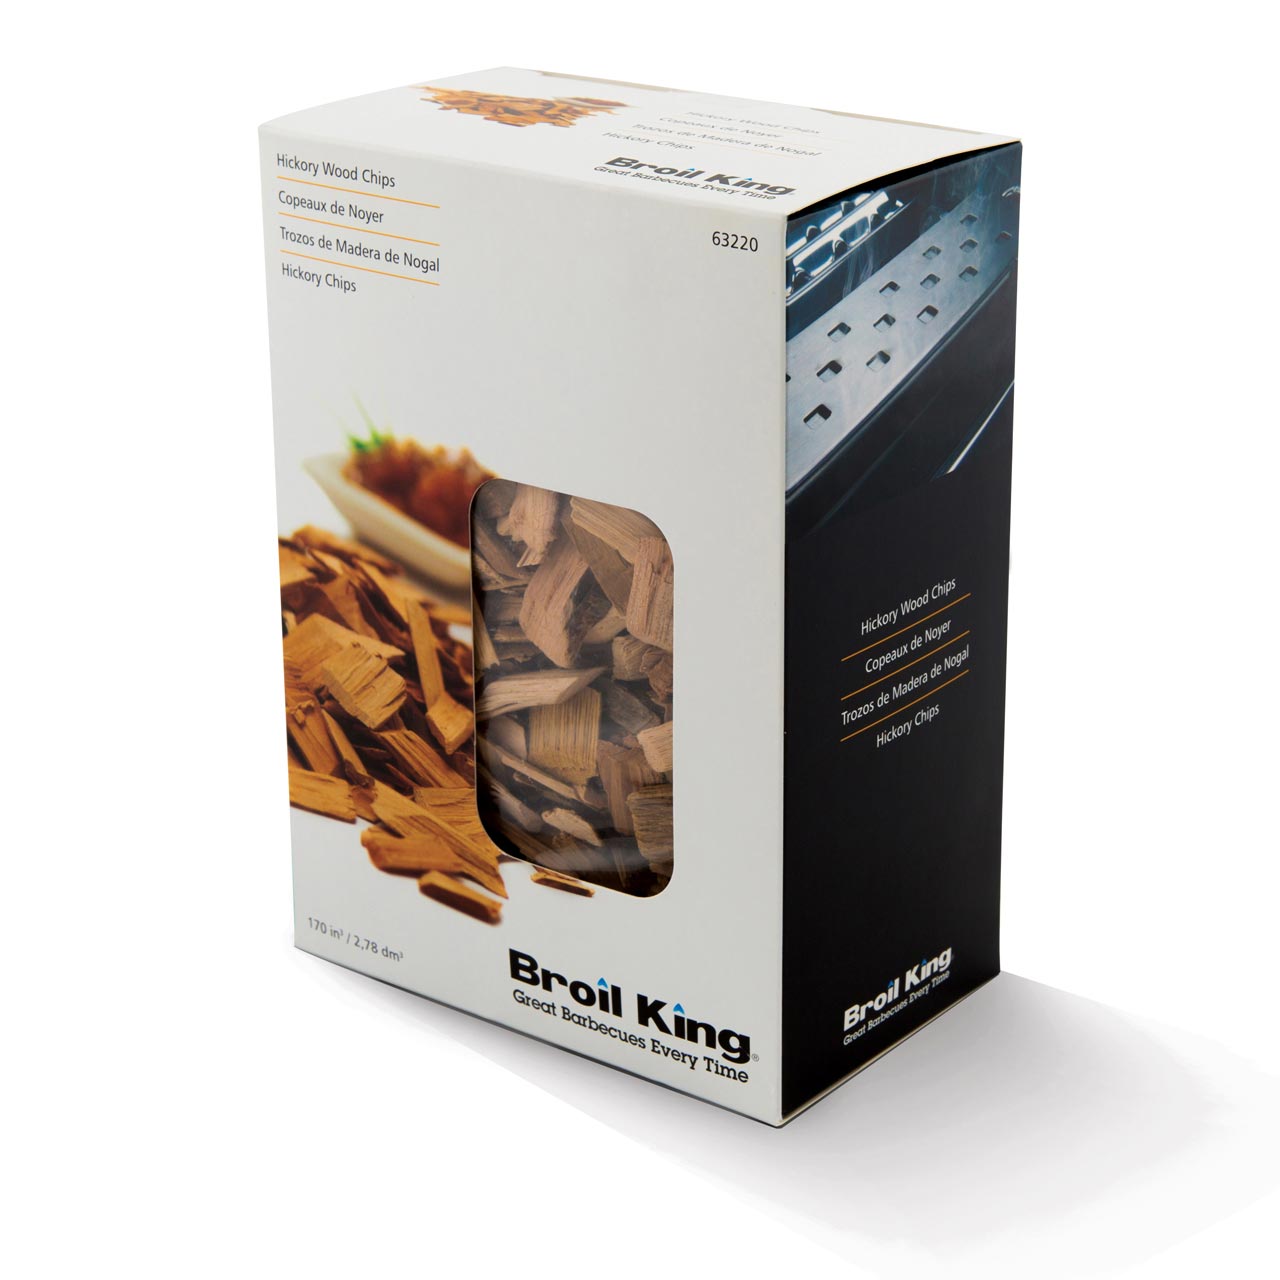 Broil King Chips - Hickory